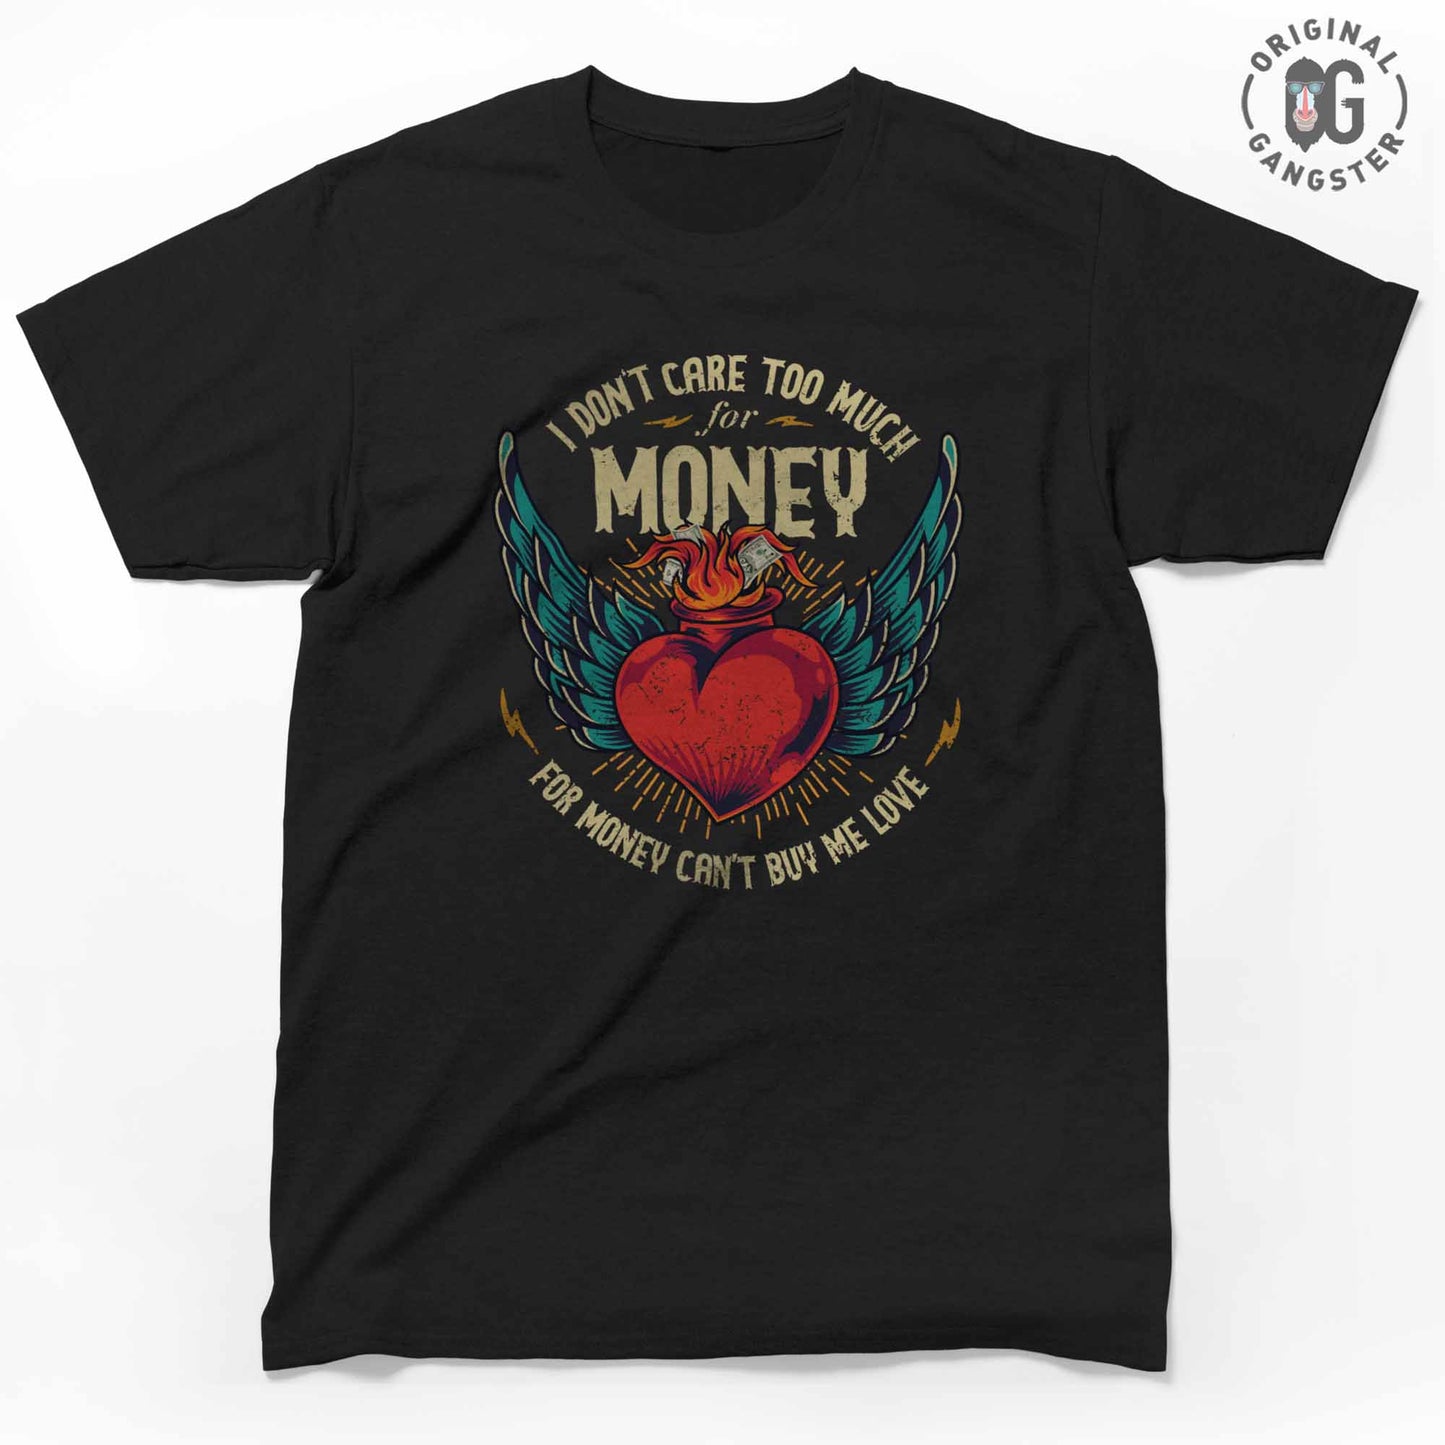 The Beatles 'Can't Buy Me Love' Unisex T-shirt